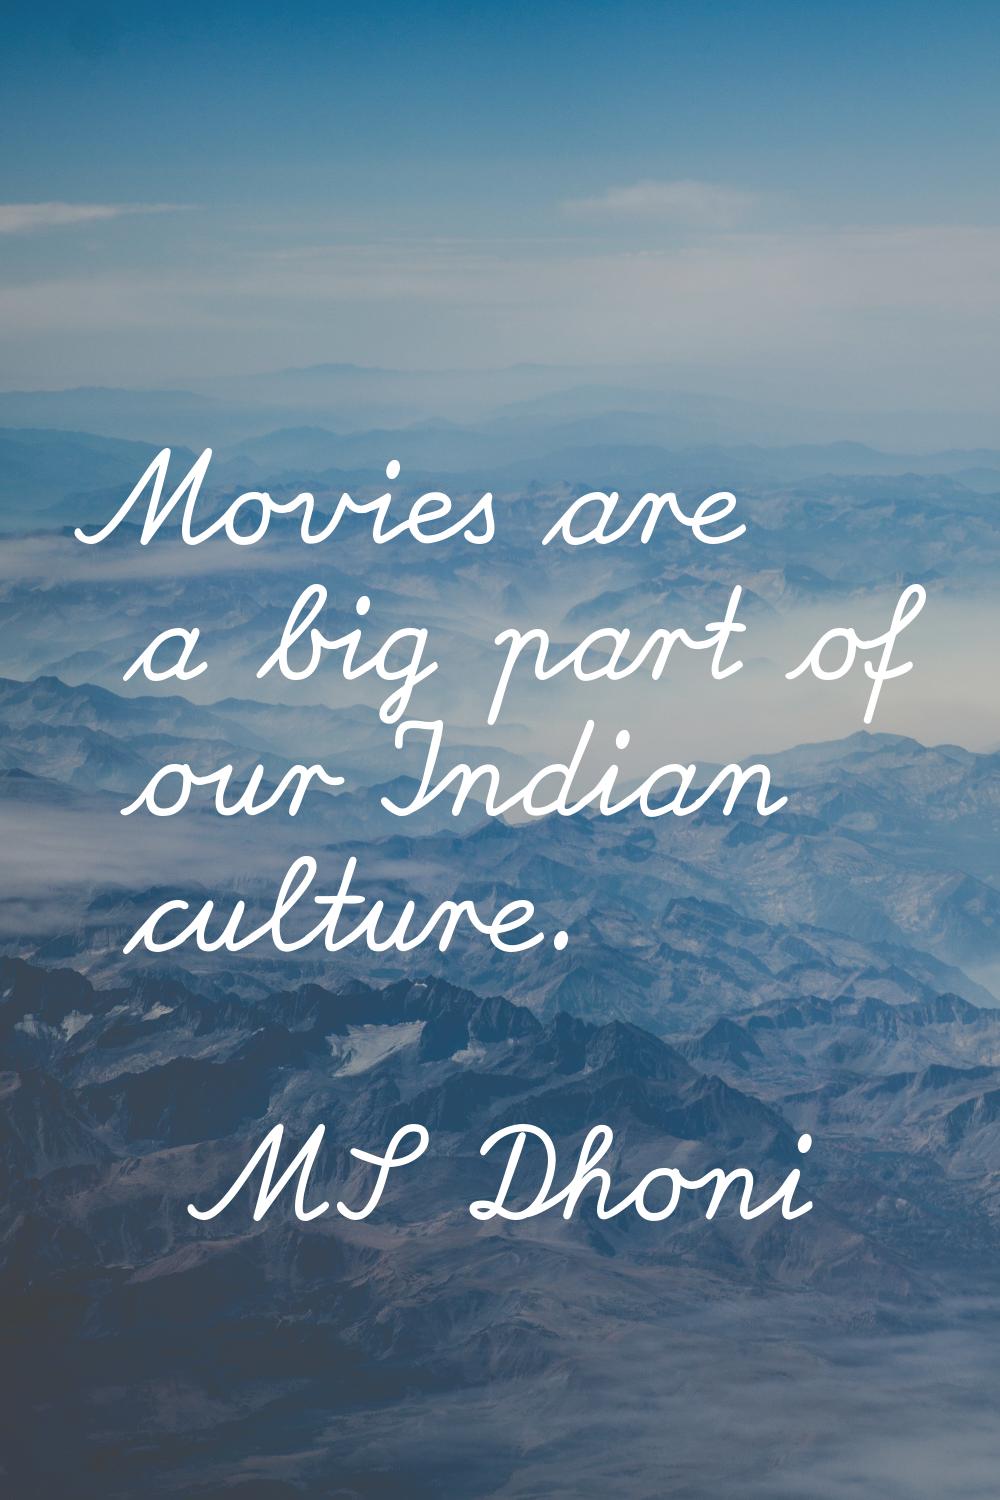 Movies are a big part of our Indian culture.